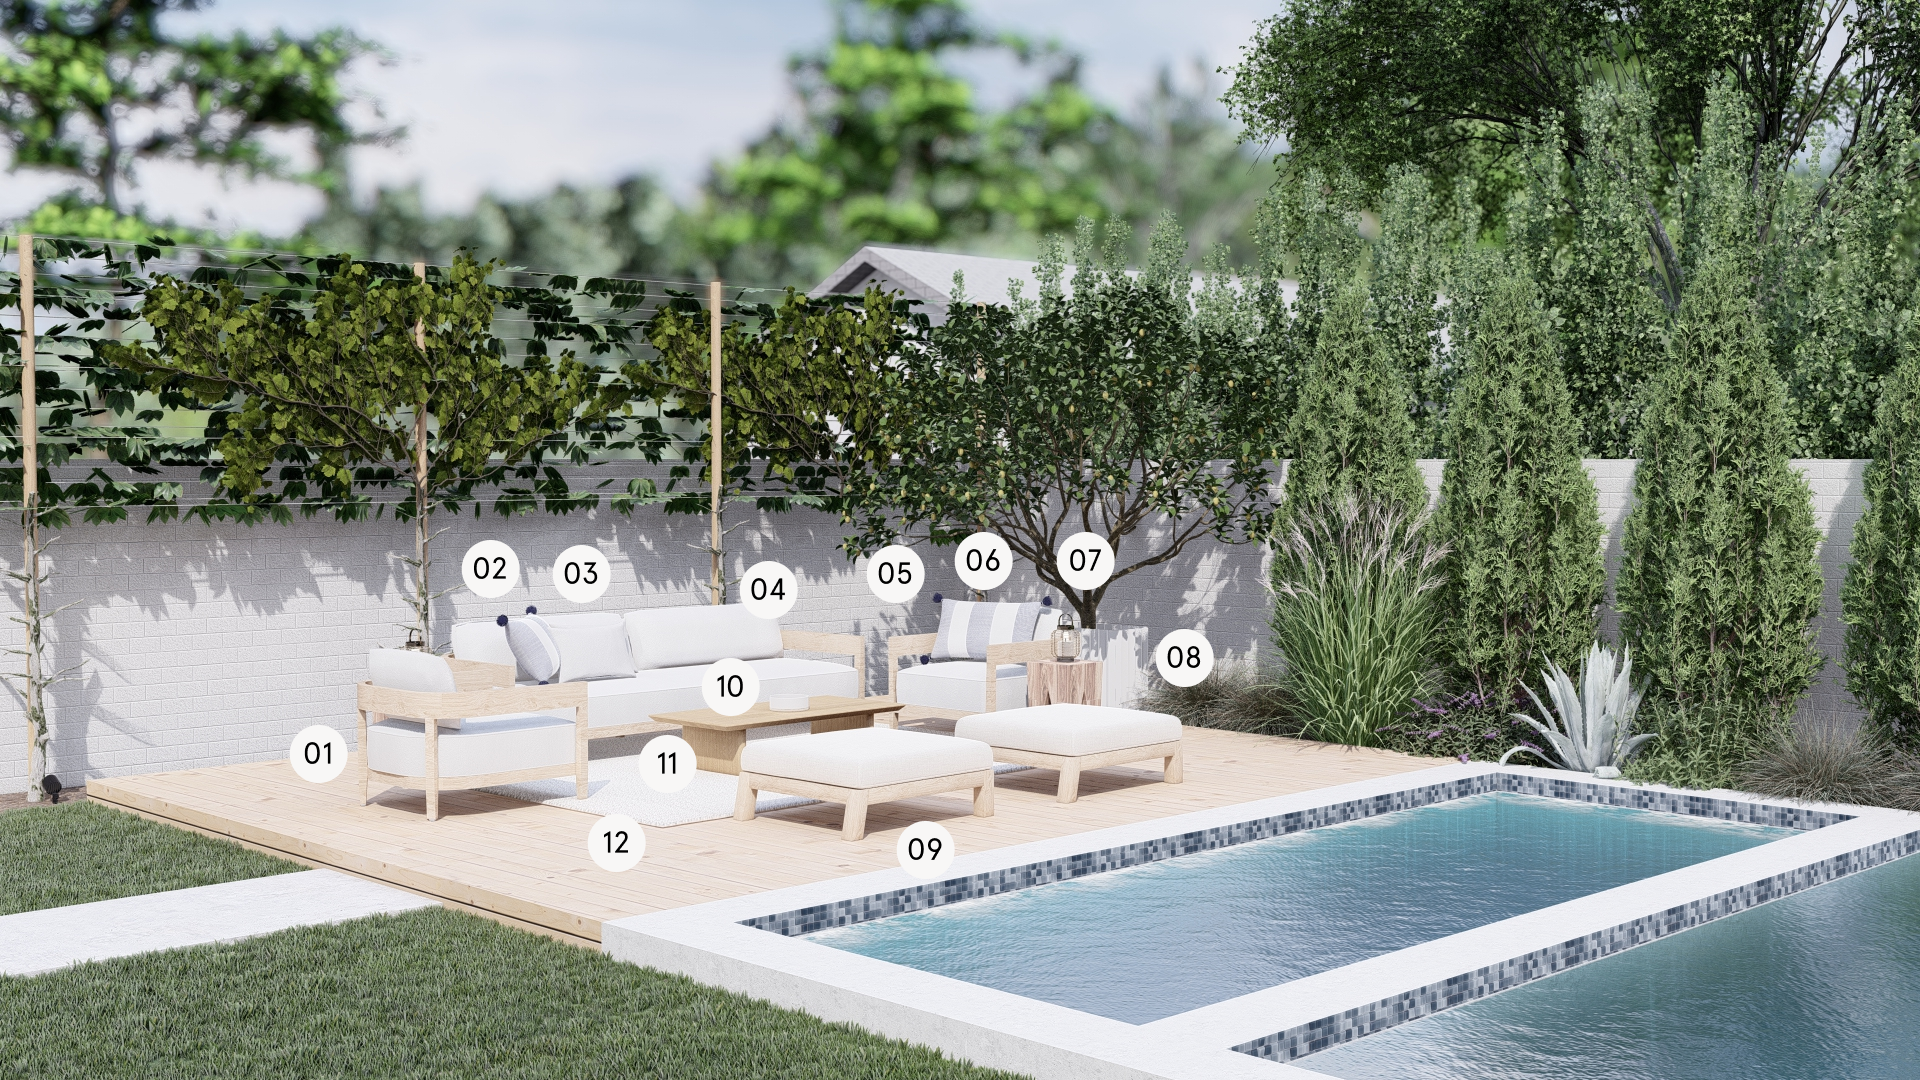 Fenced yard, outdoor sitting area with ottoman, white rug, pillows, lawn, plants and trees, pool